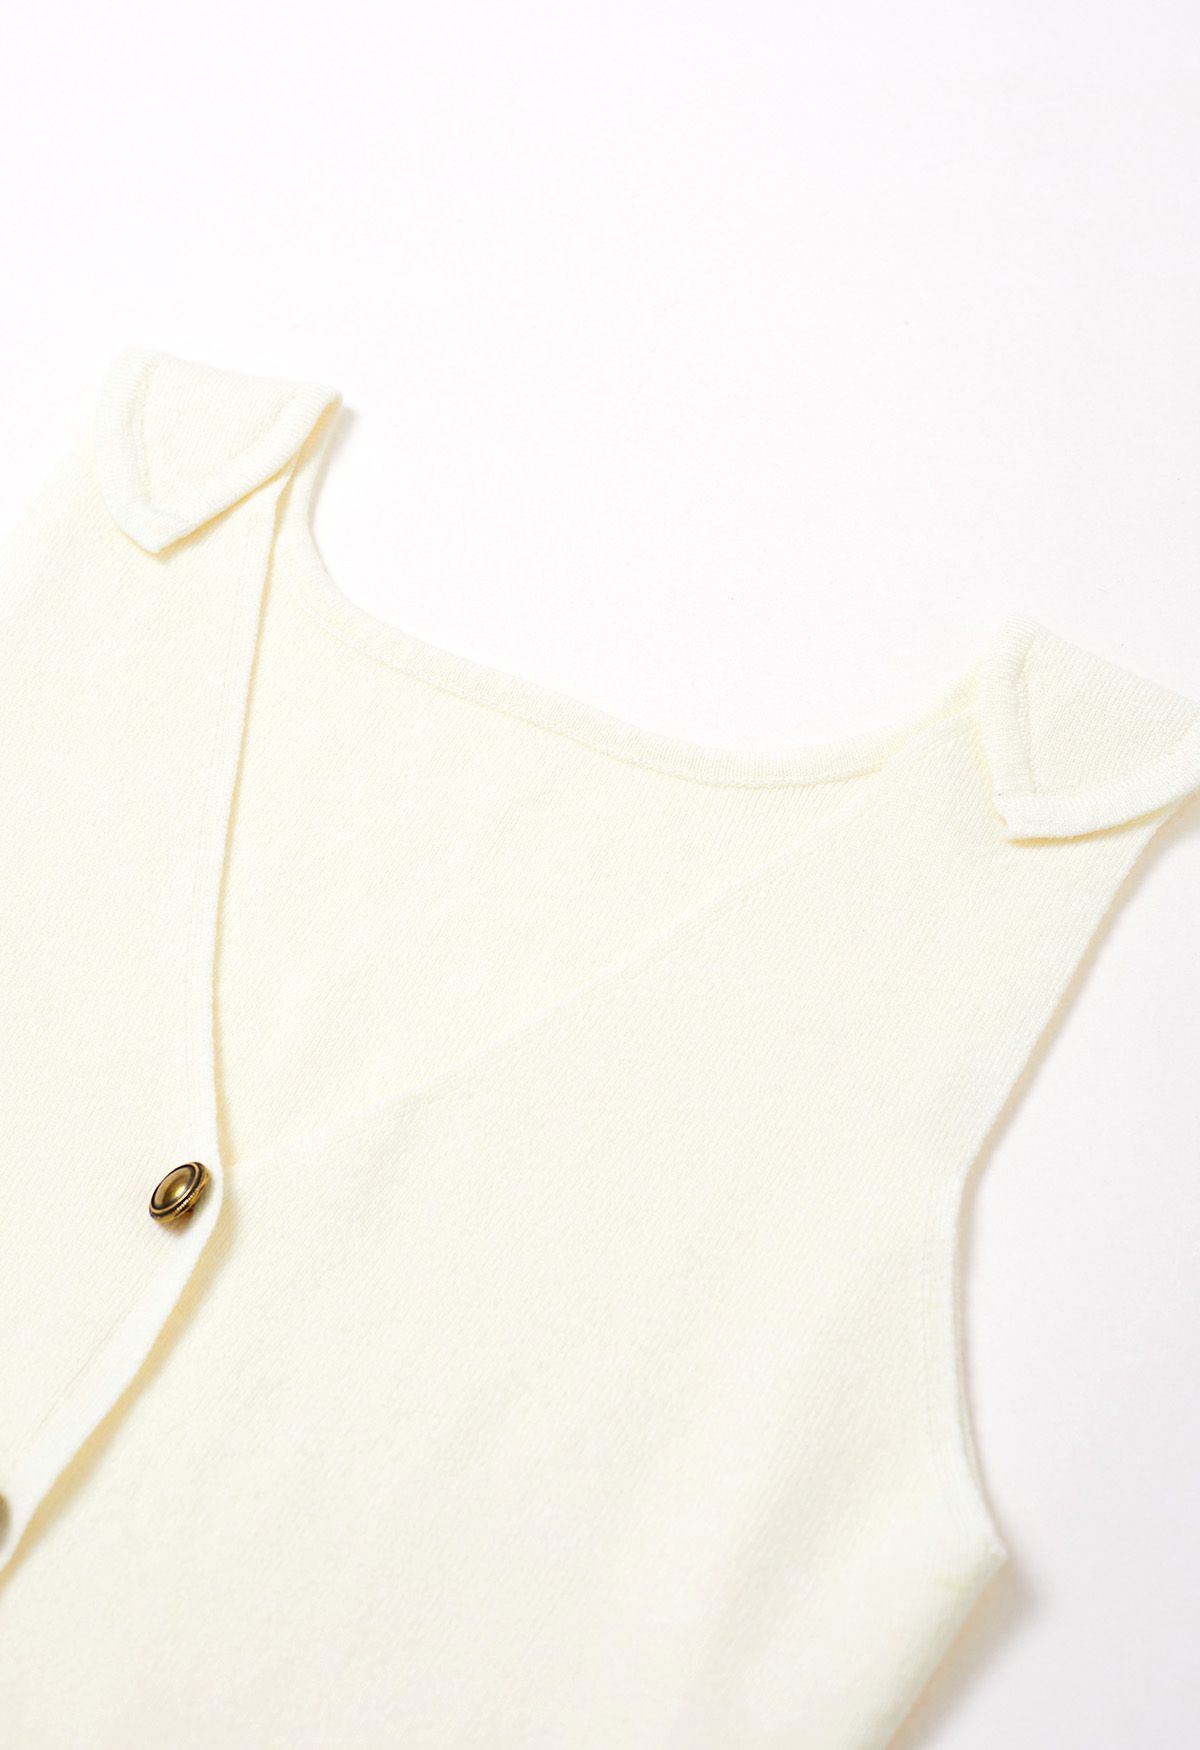 Cutout Back Buttoned Sleeveless Knit Top in White